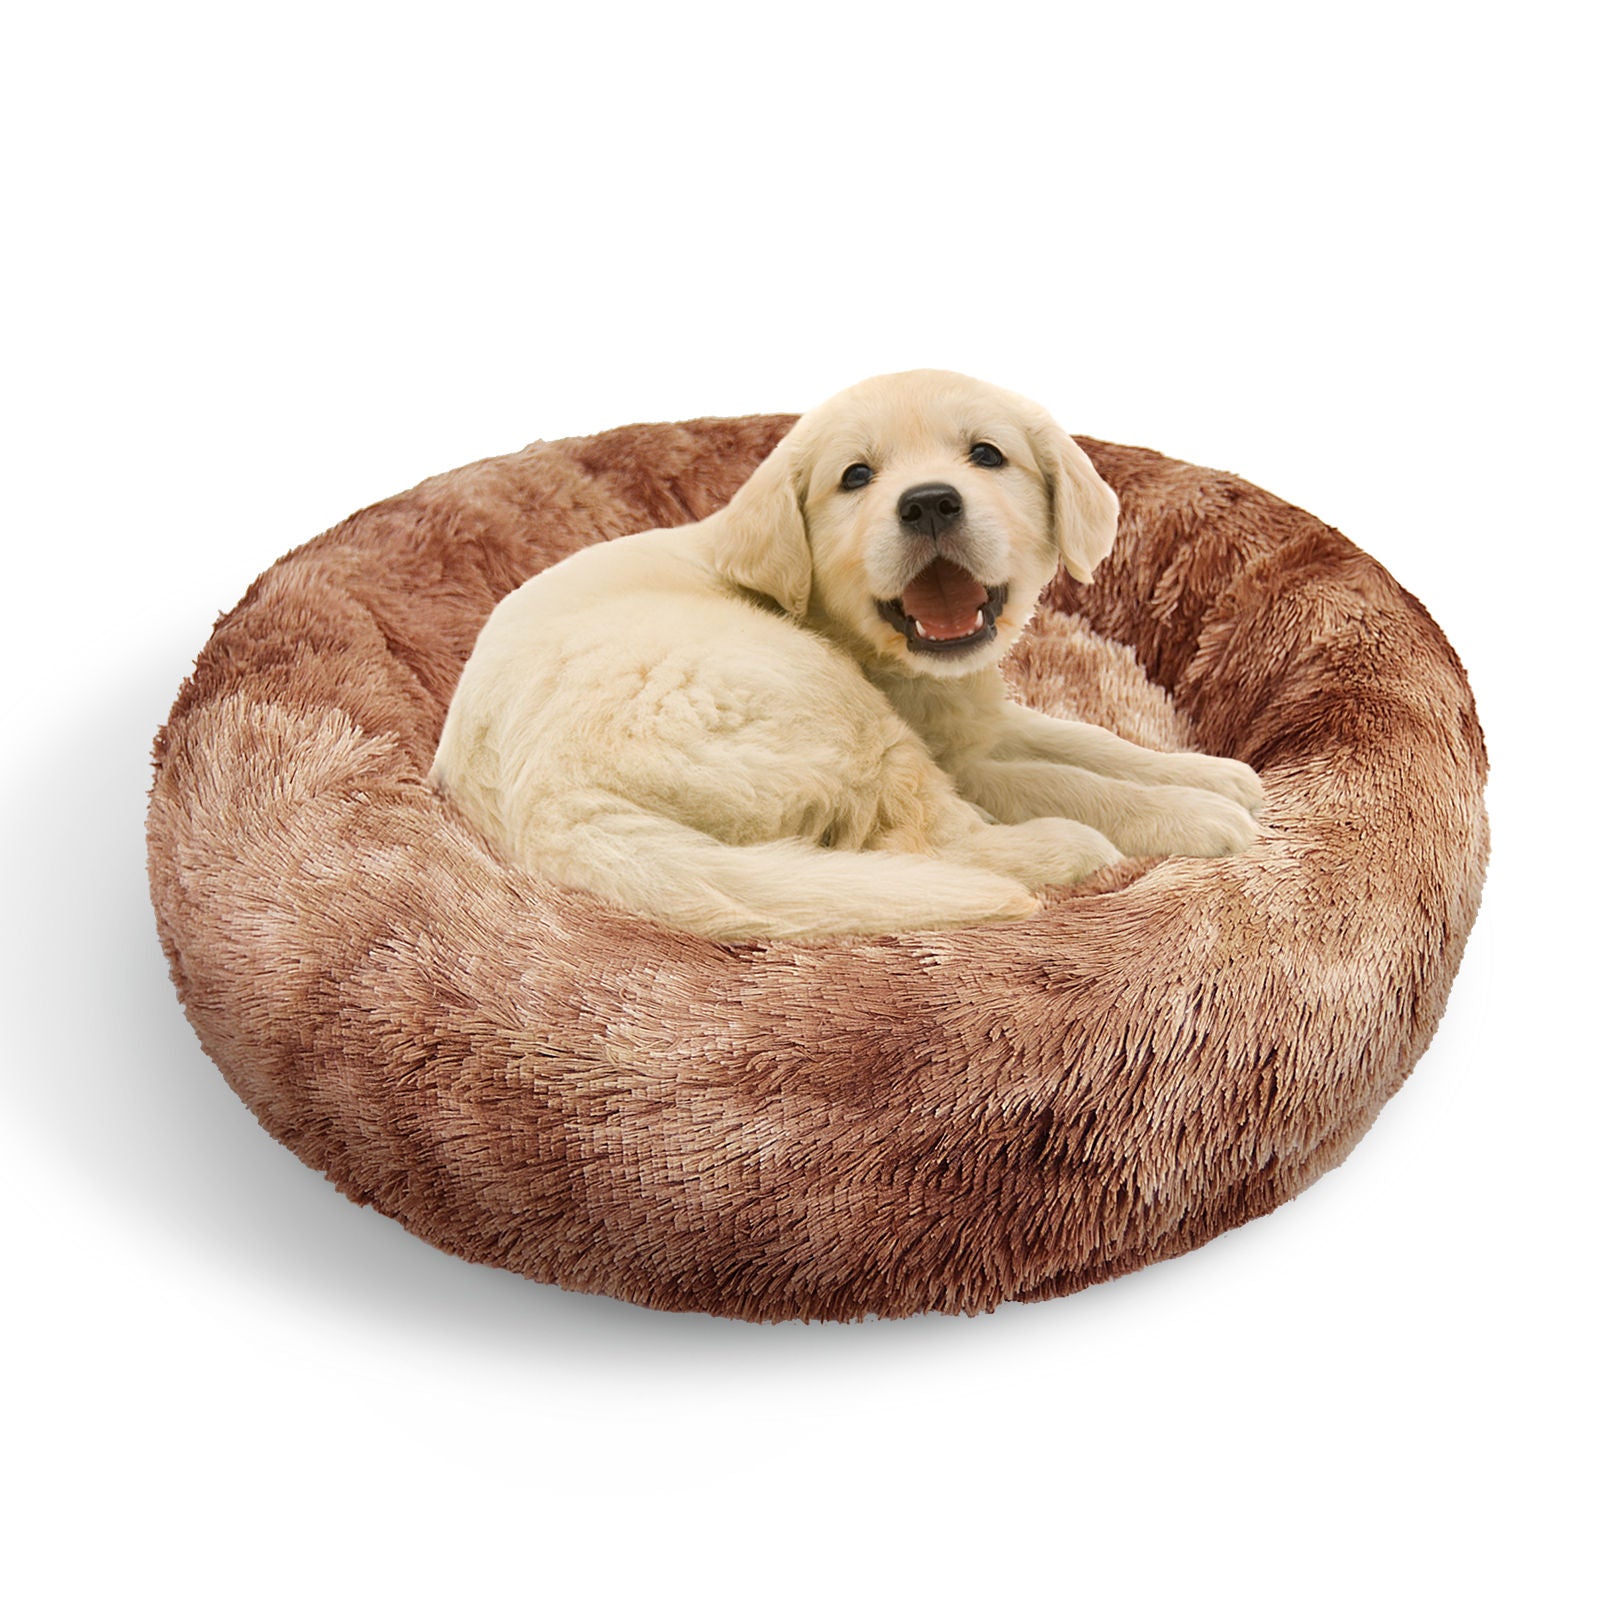 Pawfriends Dog Cat Pet Calming Bed Warm Soft Plush Round Nest Comfy Sleeping Cave 120cm